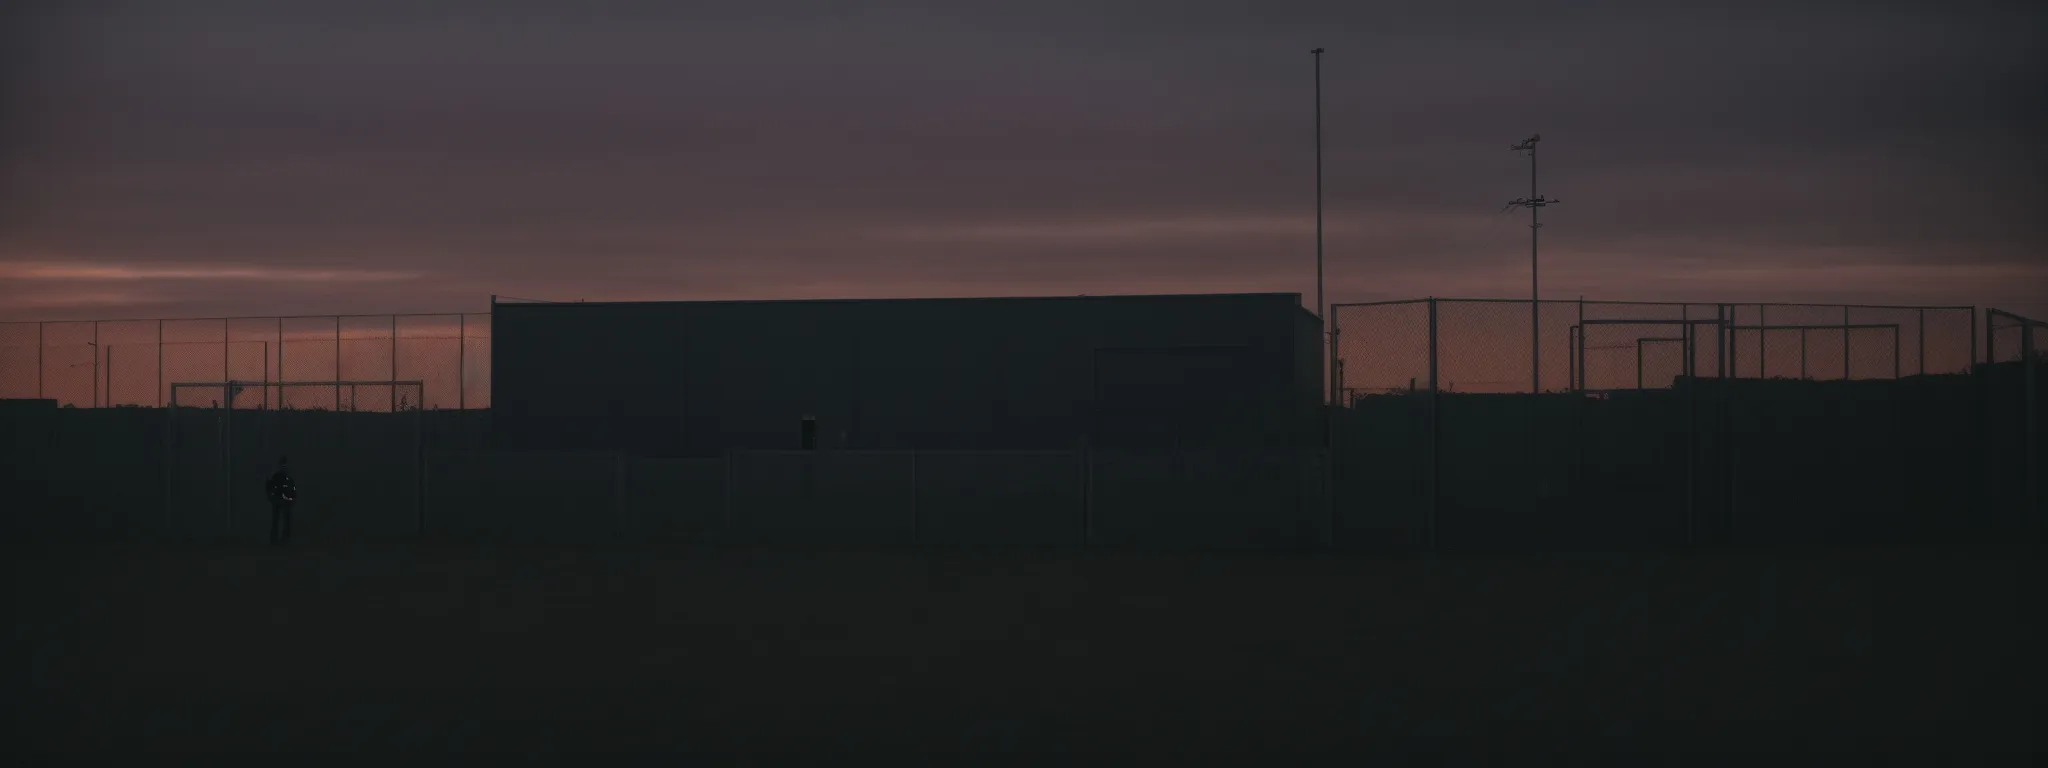 a security guard patrols the perimeter of a fenced and gated server farm at dusk.